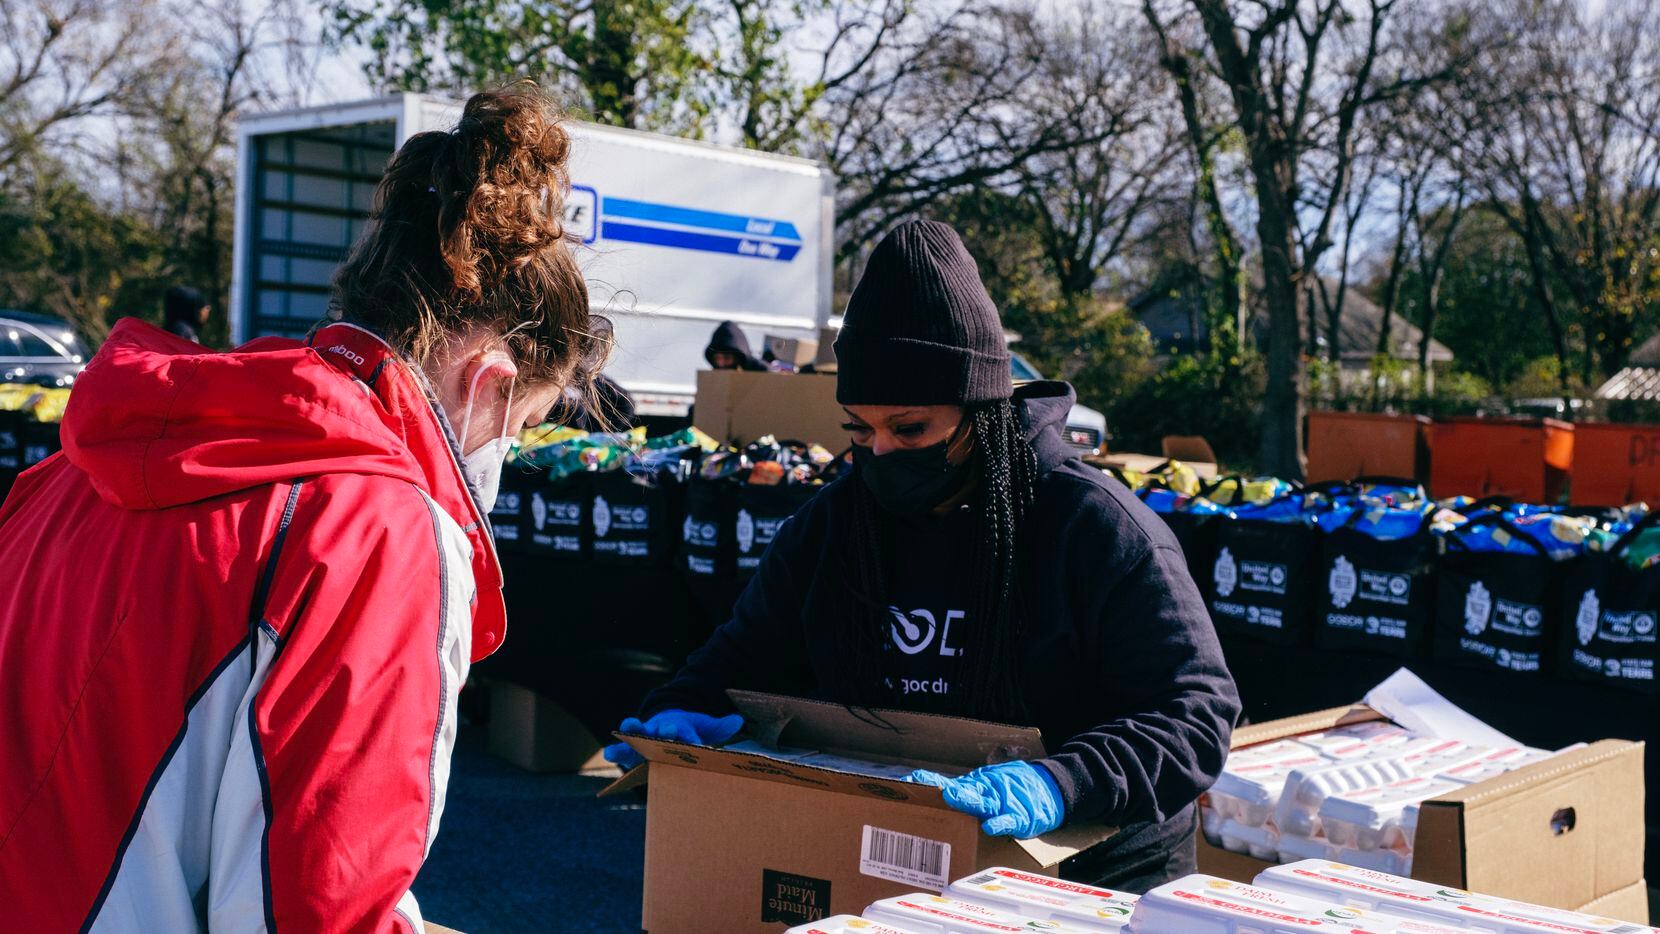 Employees with Goodr prepare for a pop-up grocery event wearing masks and opening boxes.